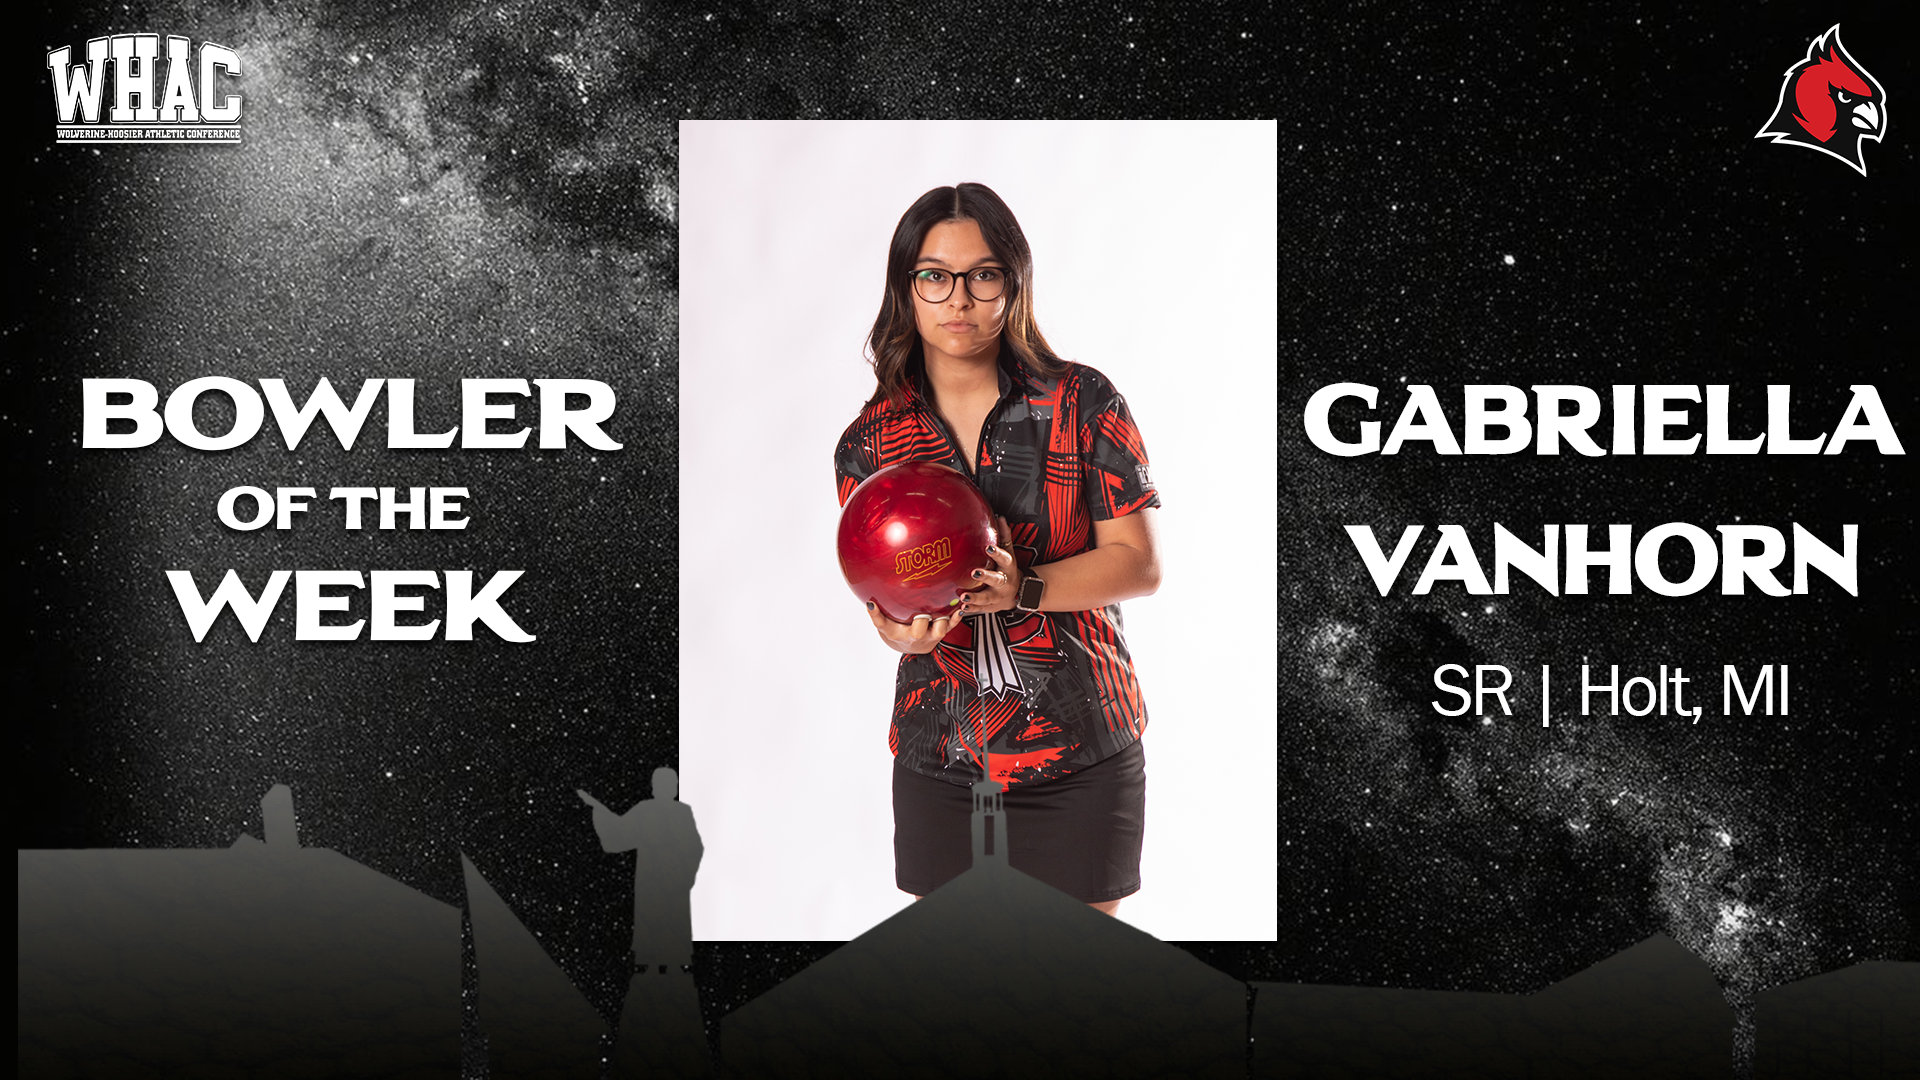 Gabriella VanHorn earns her first WHAC Bowler of the Week of the season